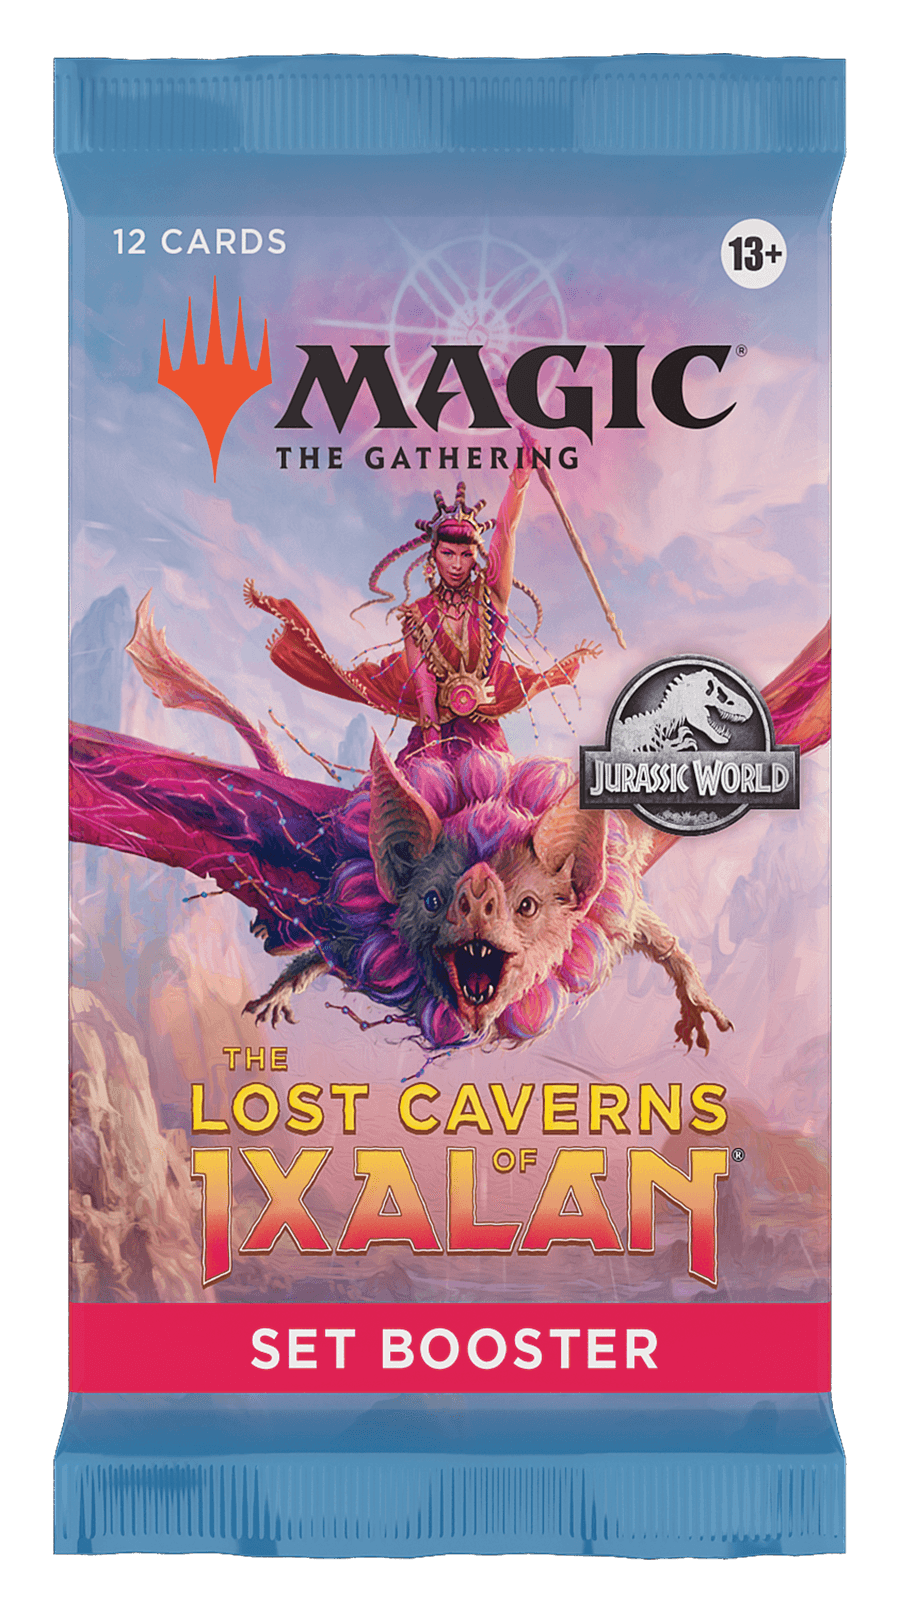 Magic: The Gathering - The Lost Caverns of Ixalan - Set Booster Pack